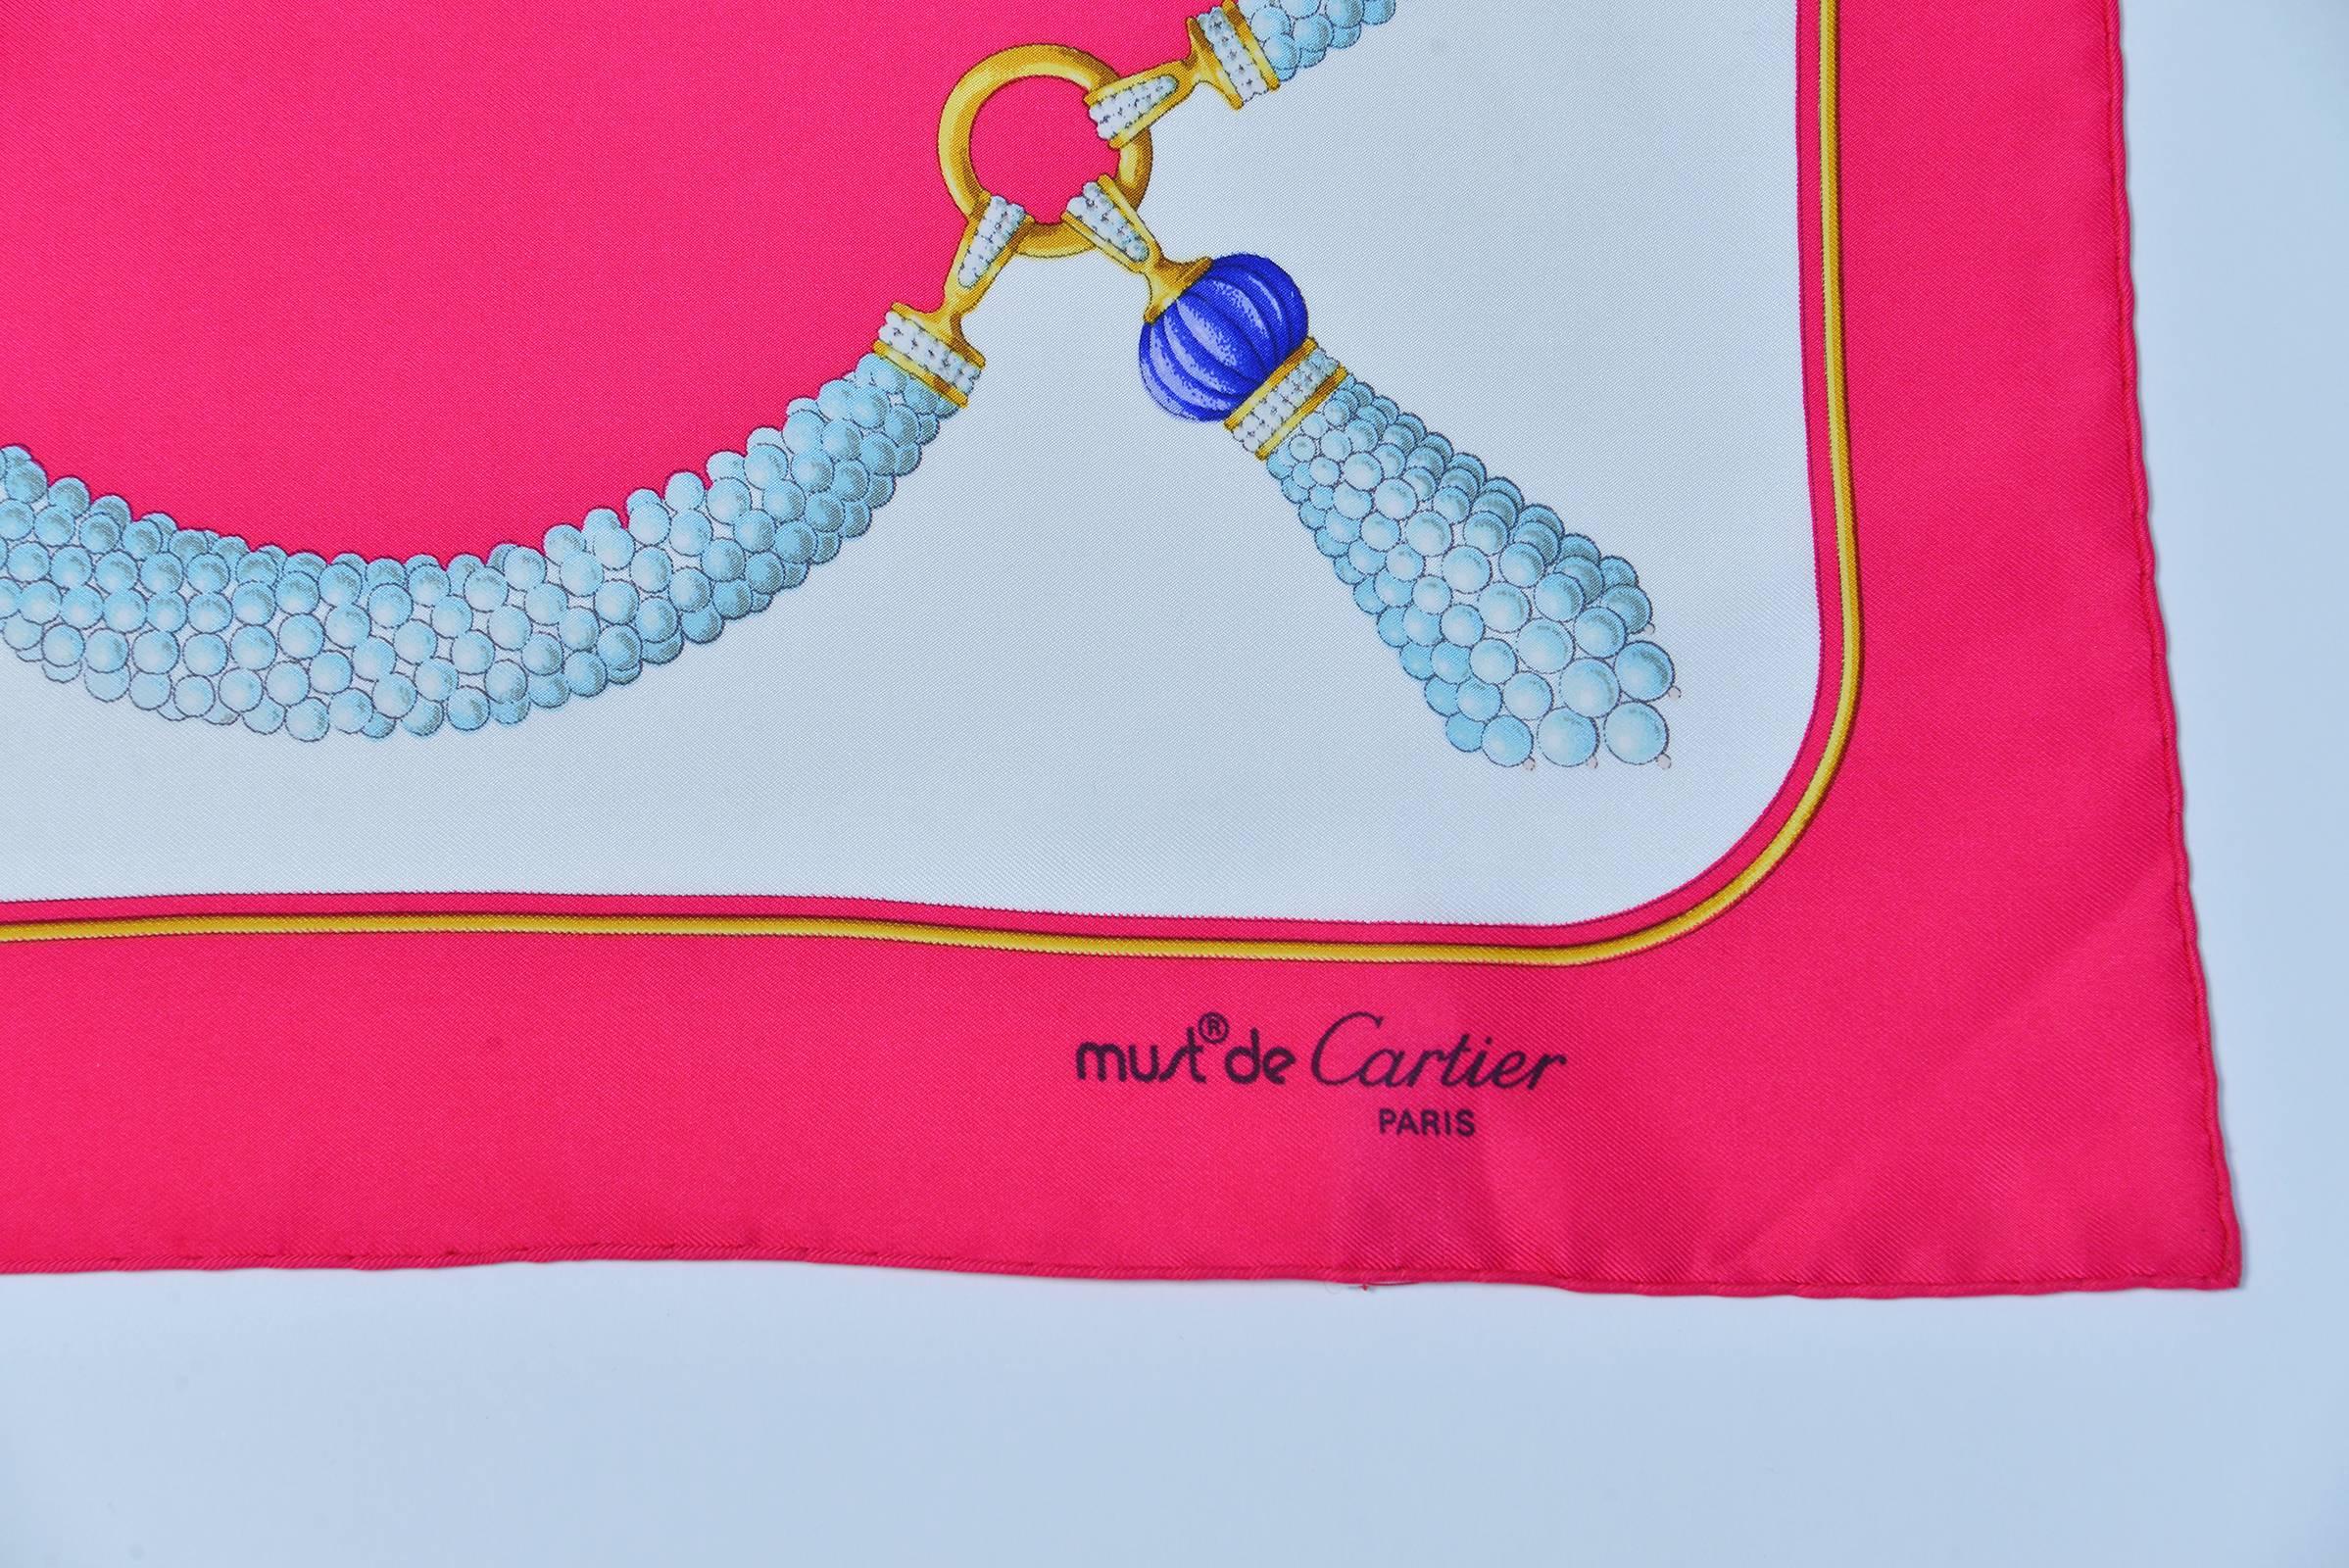 Beautiful Must de Cartier Paris classic pearl pendant style scarf is a perfect addition to a spring wardrobe.  The hot Pink & pearl necklace and tassels motif design adds a touch of refinement as well.  Elegantly done with wonderful detailing in the